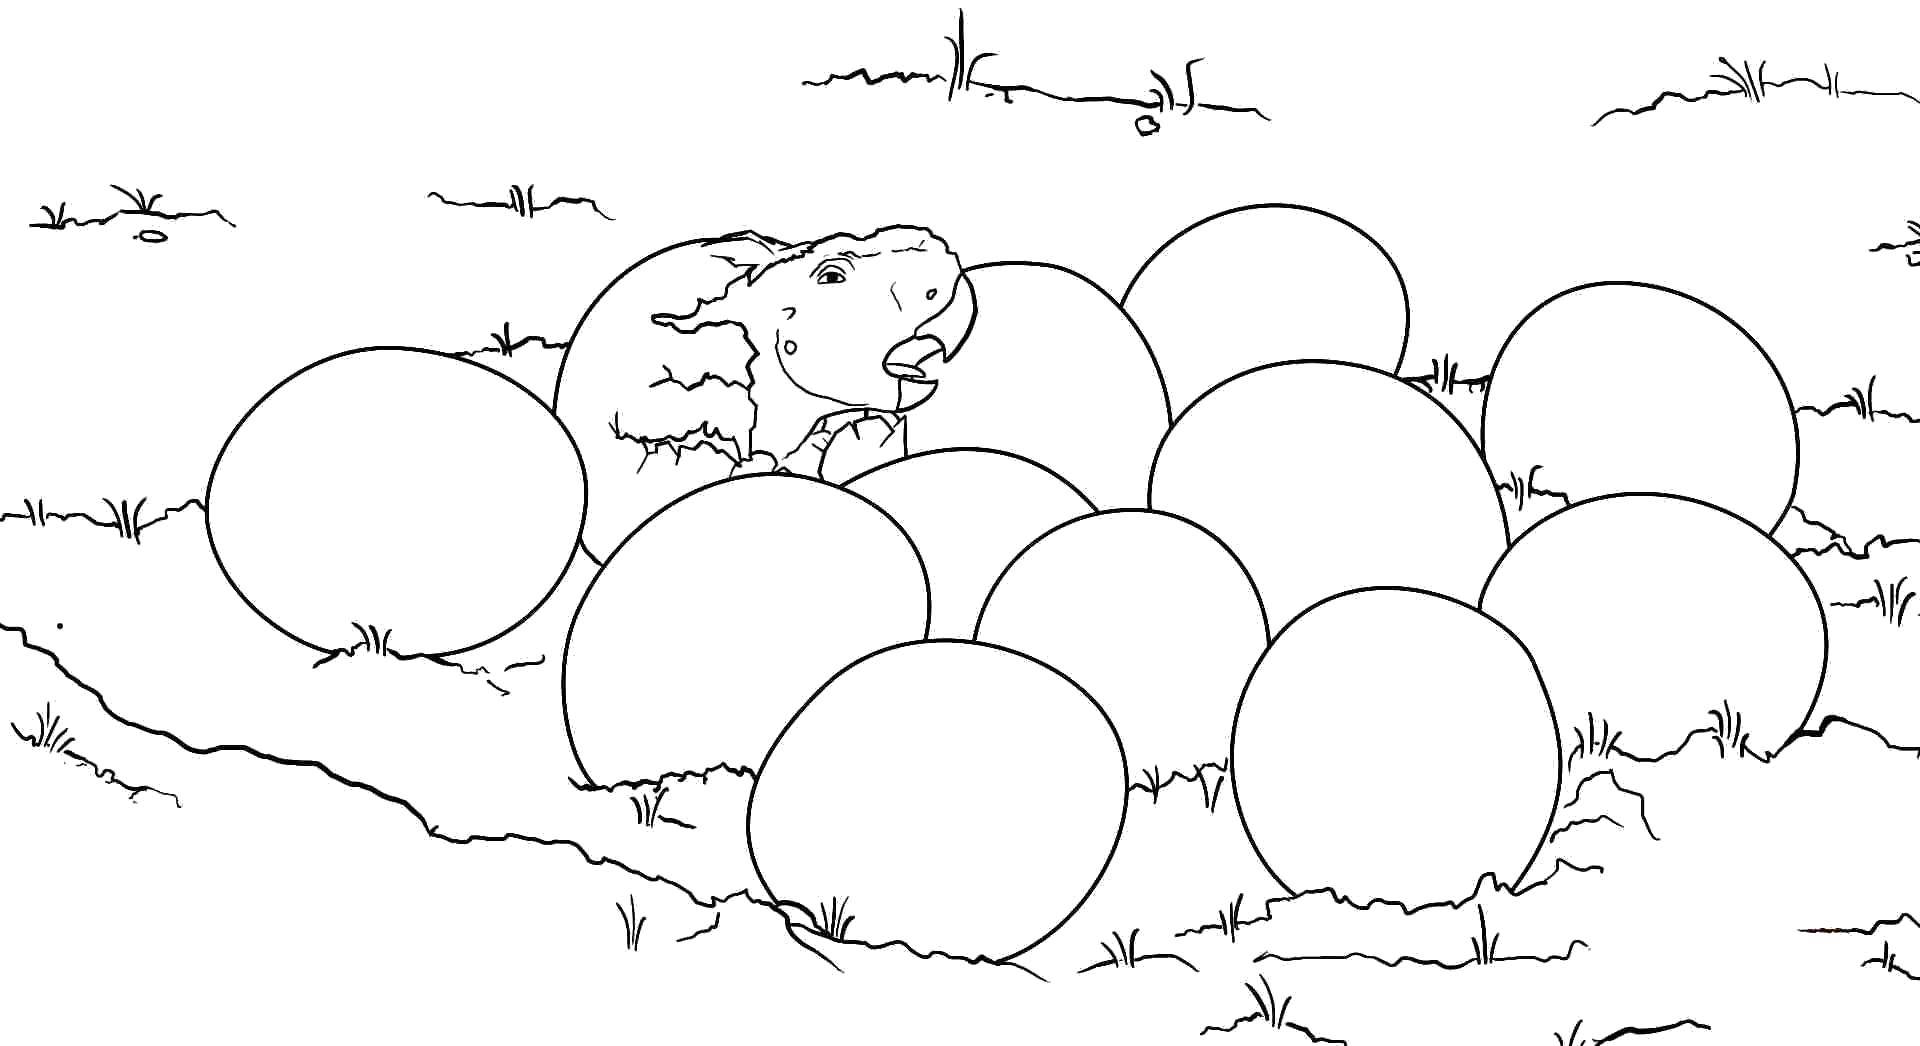 Dinosaur Egg Coloring Pages - Free & Printable!